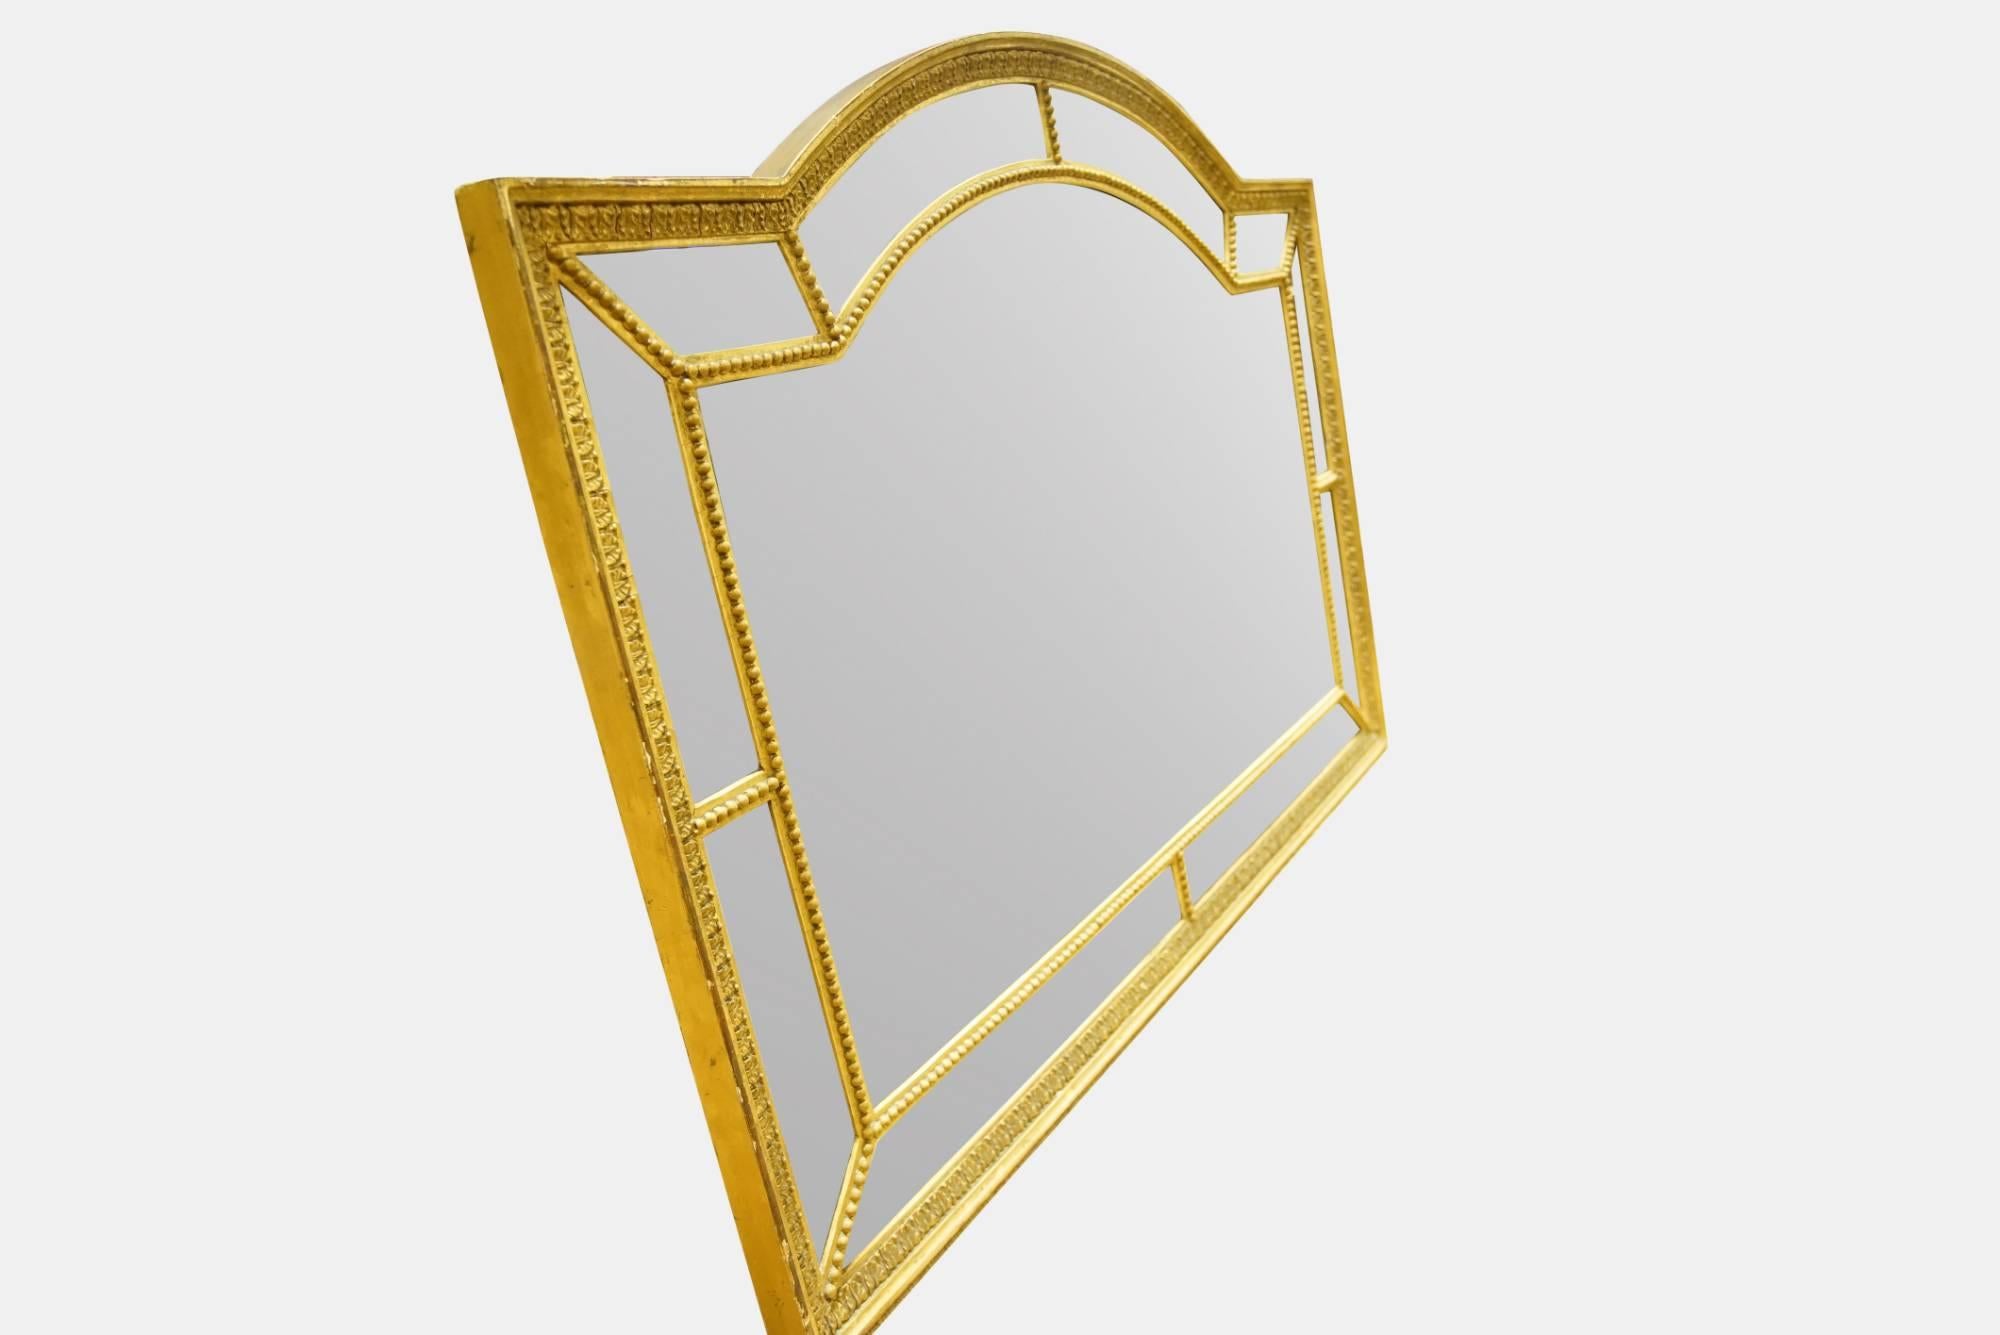 A George III style boarder mirror with arched top,

circa 1900.